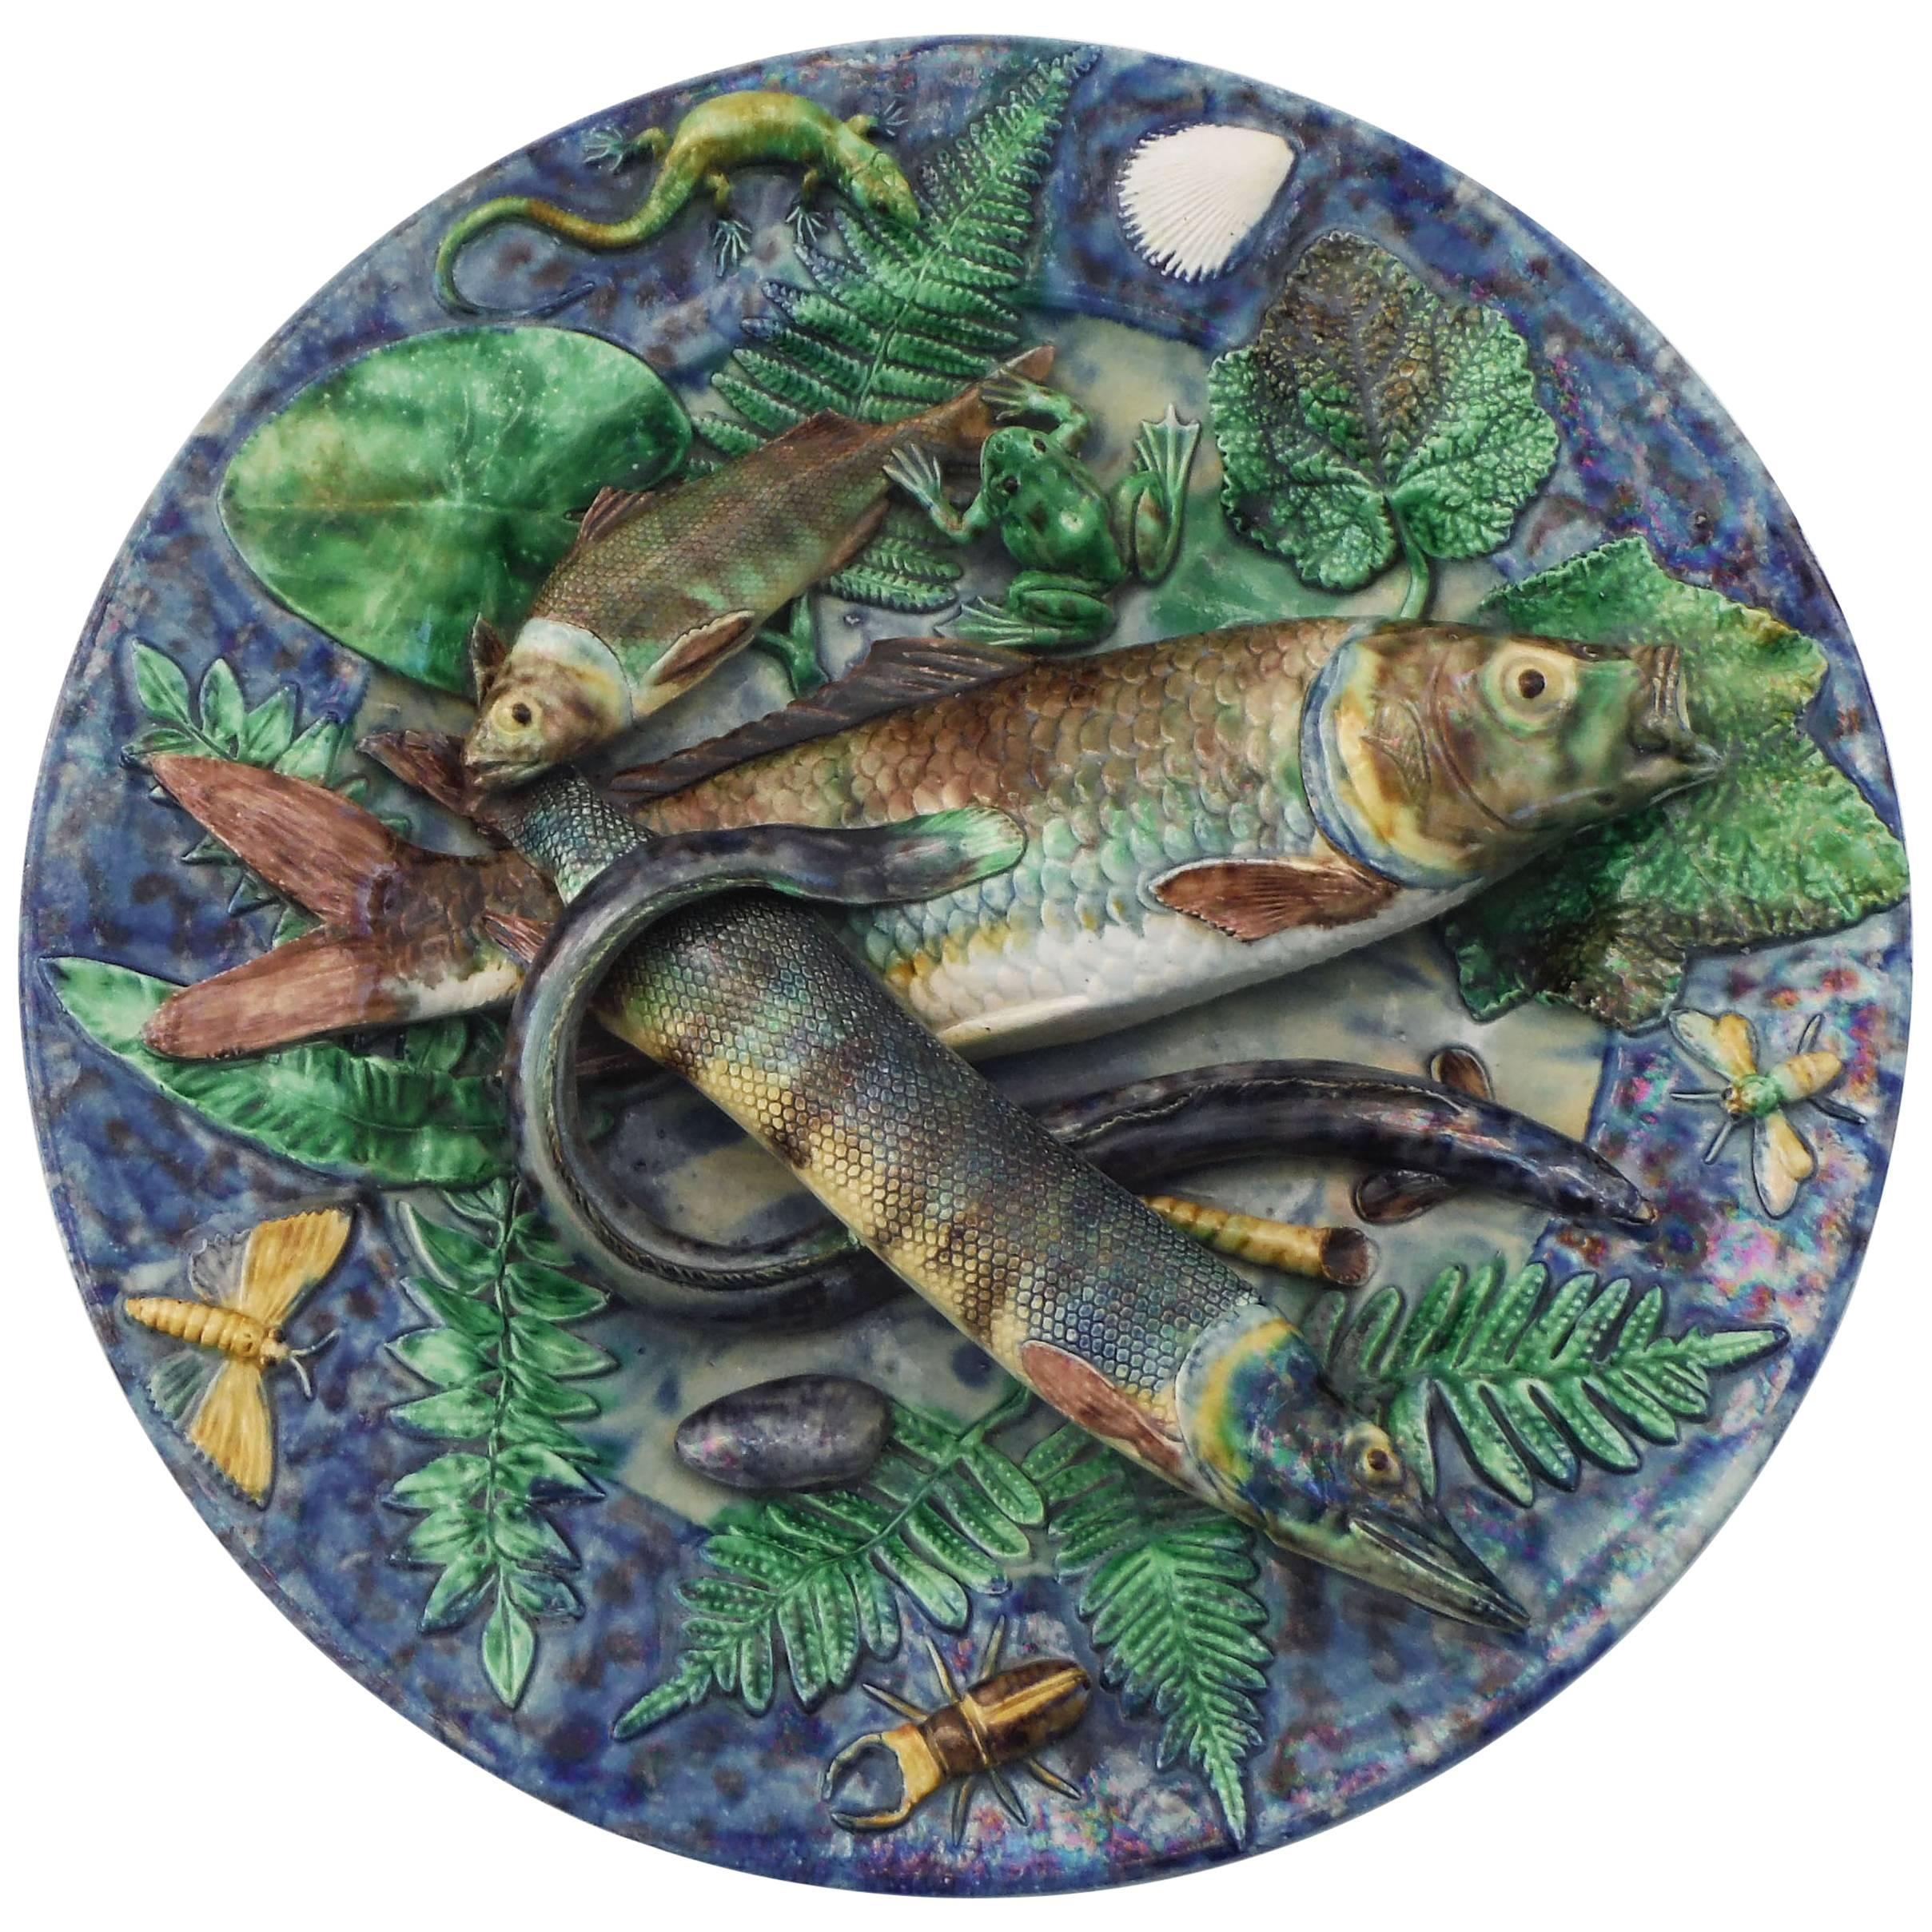 19th Century Majolica Palissy Fishs Wall Platter by Victor Barbizet